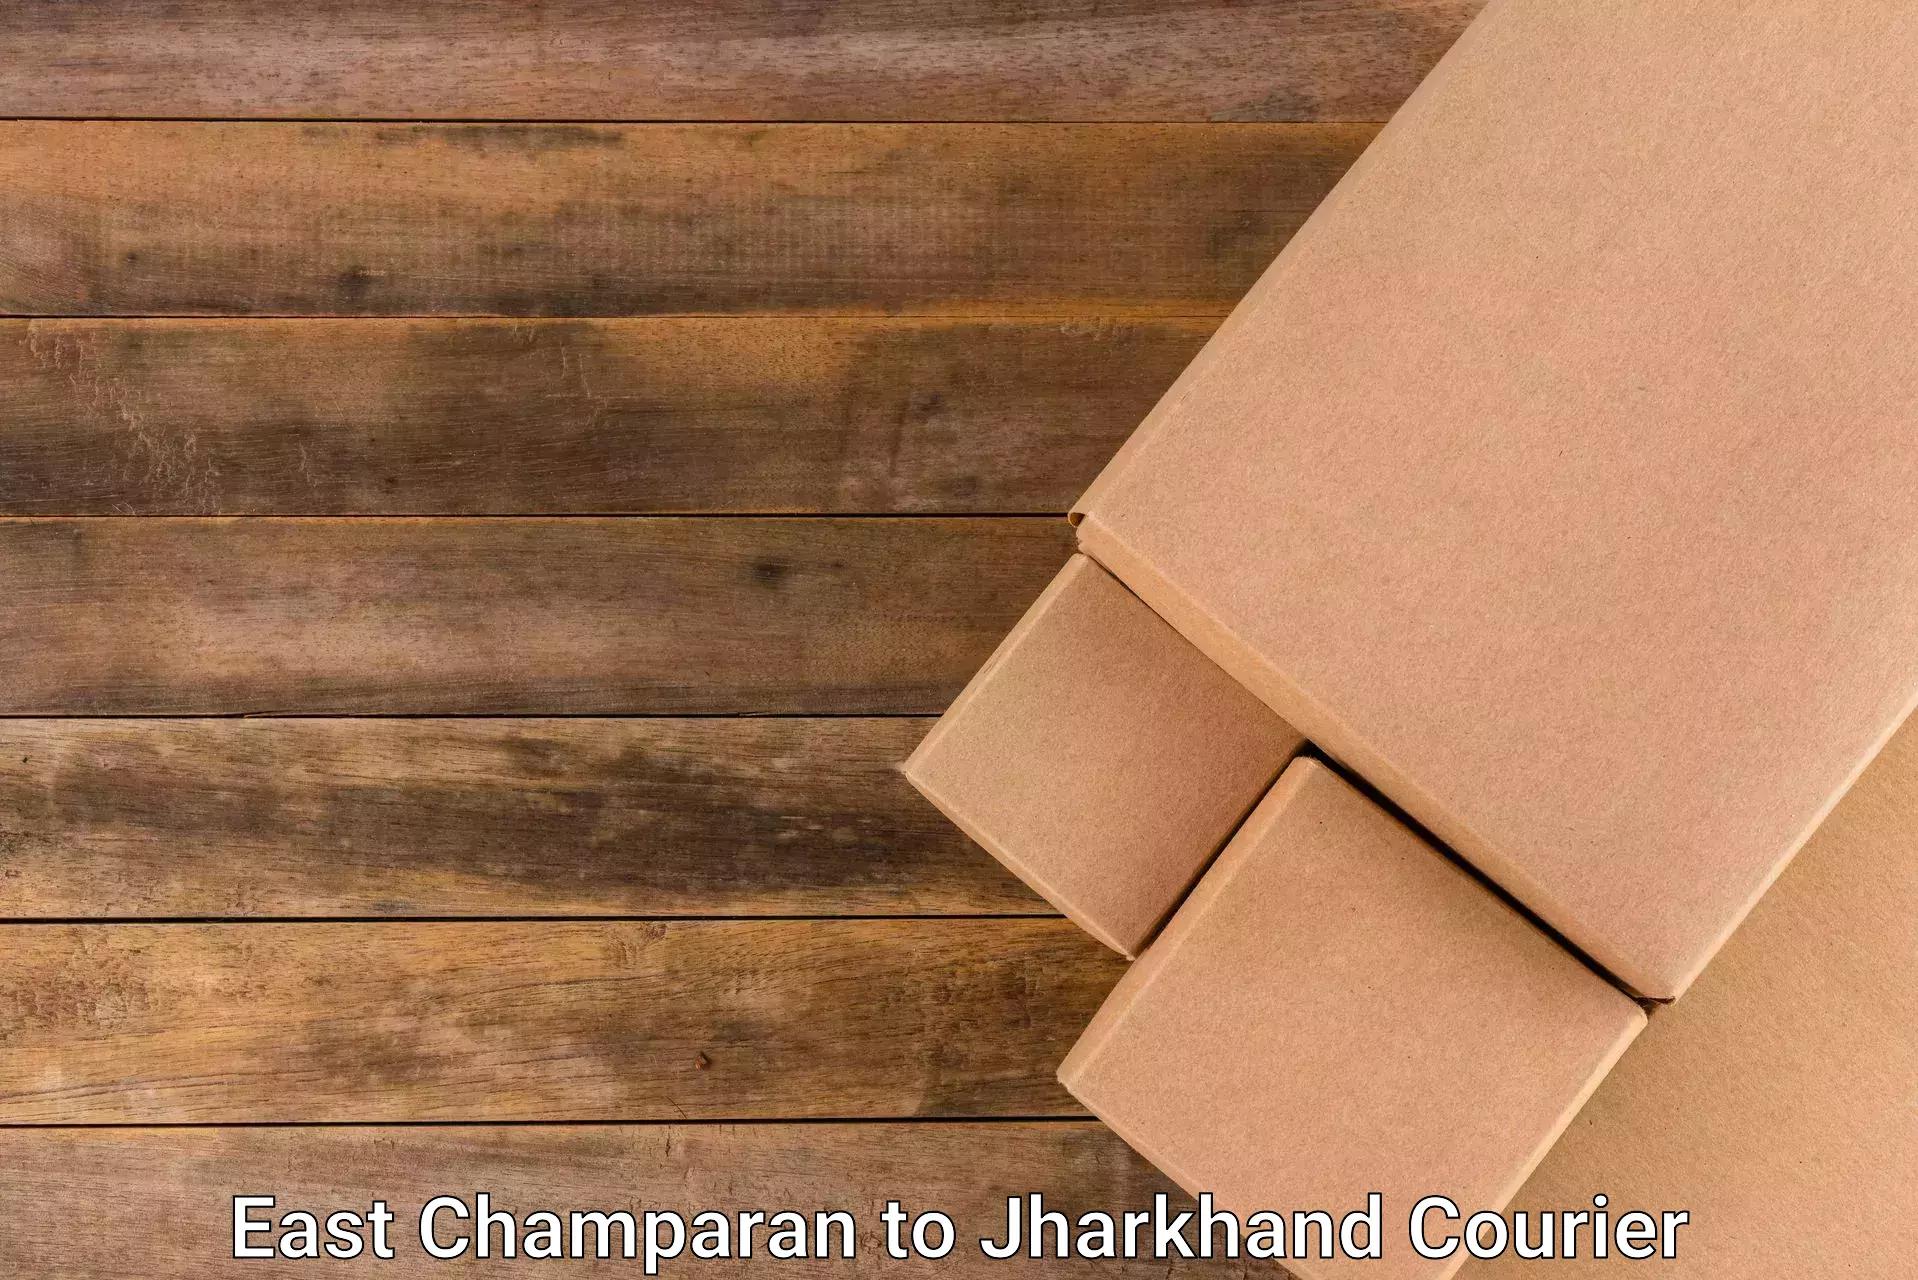 Reliable freight solutions East Champaran to Latehar